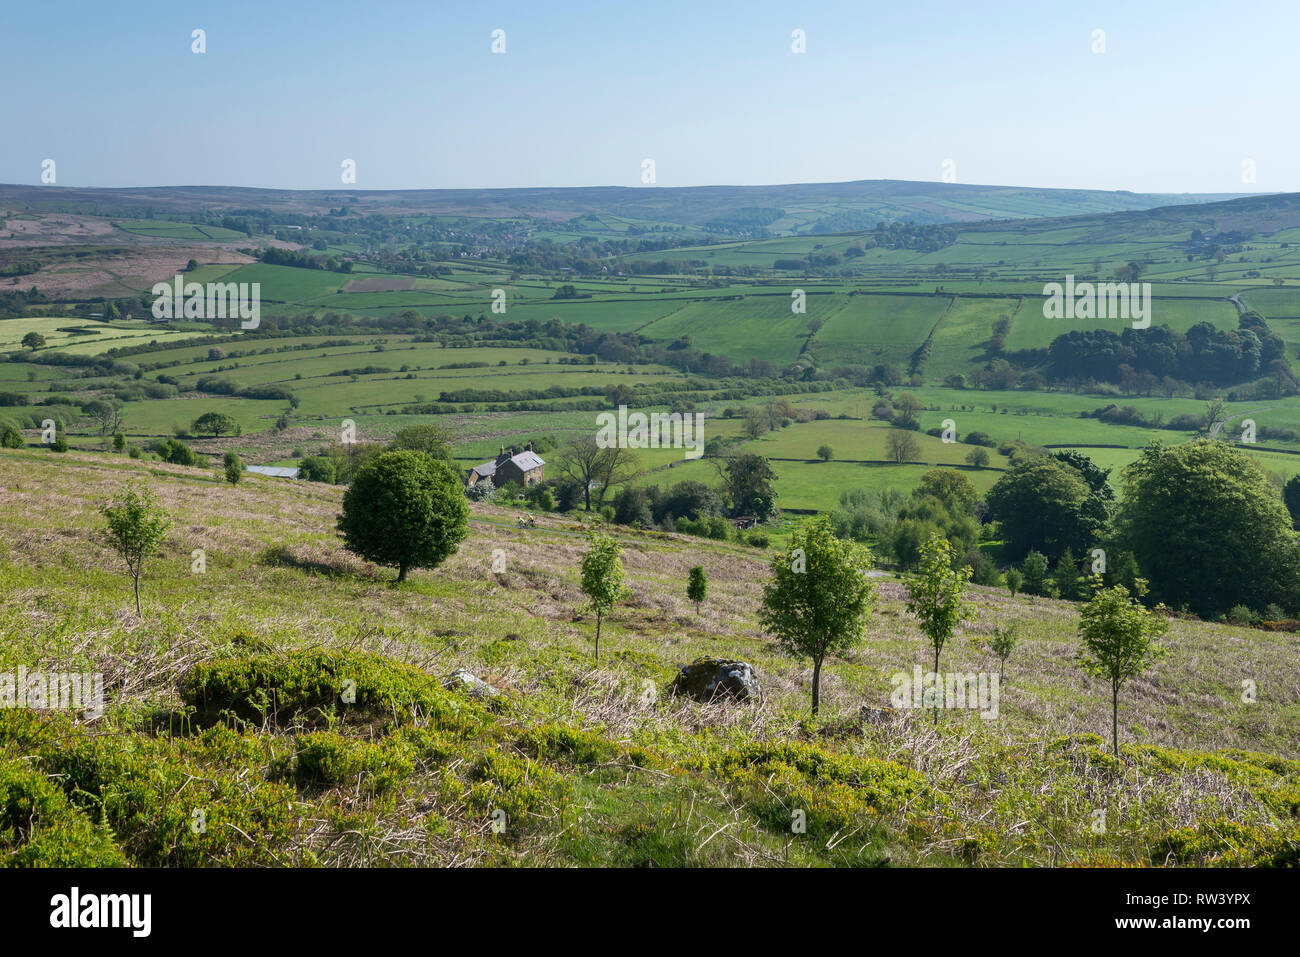 The village of Castleton and Danby Dale in the North York Moors national park, England. Stock Photo